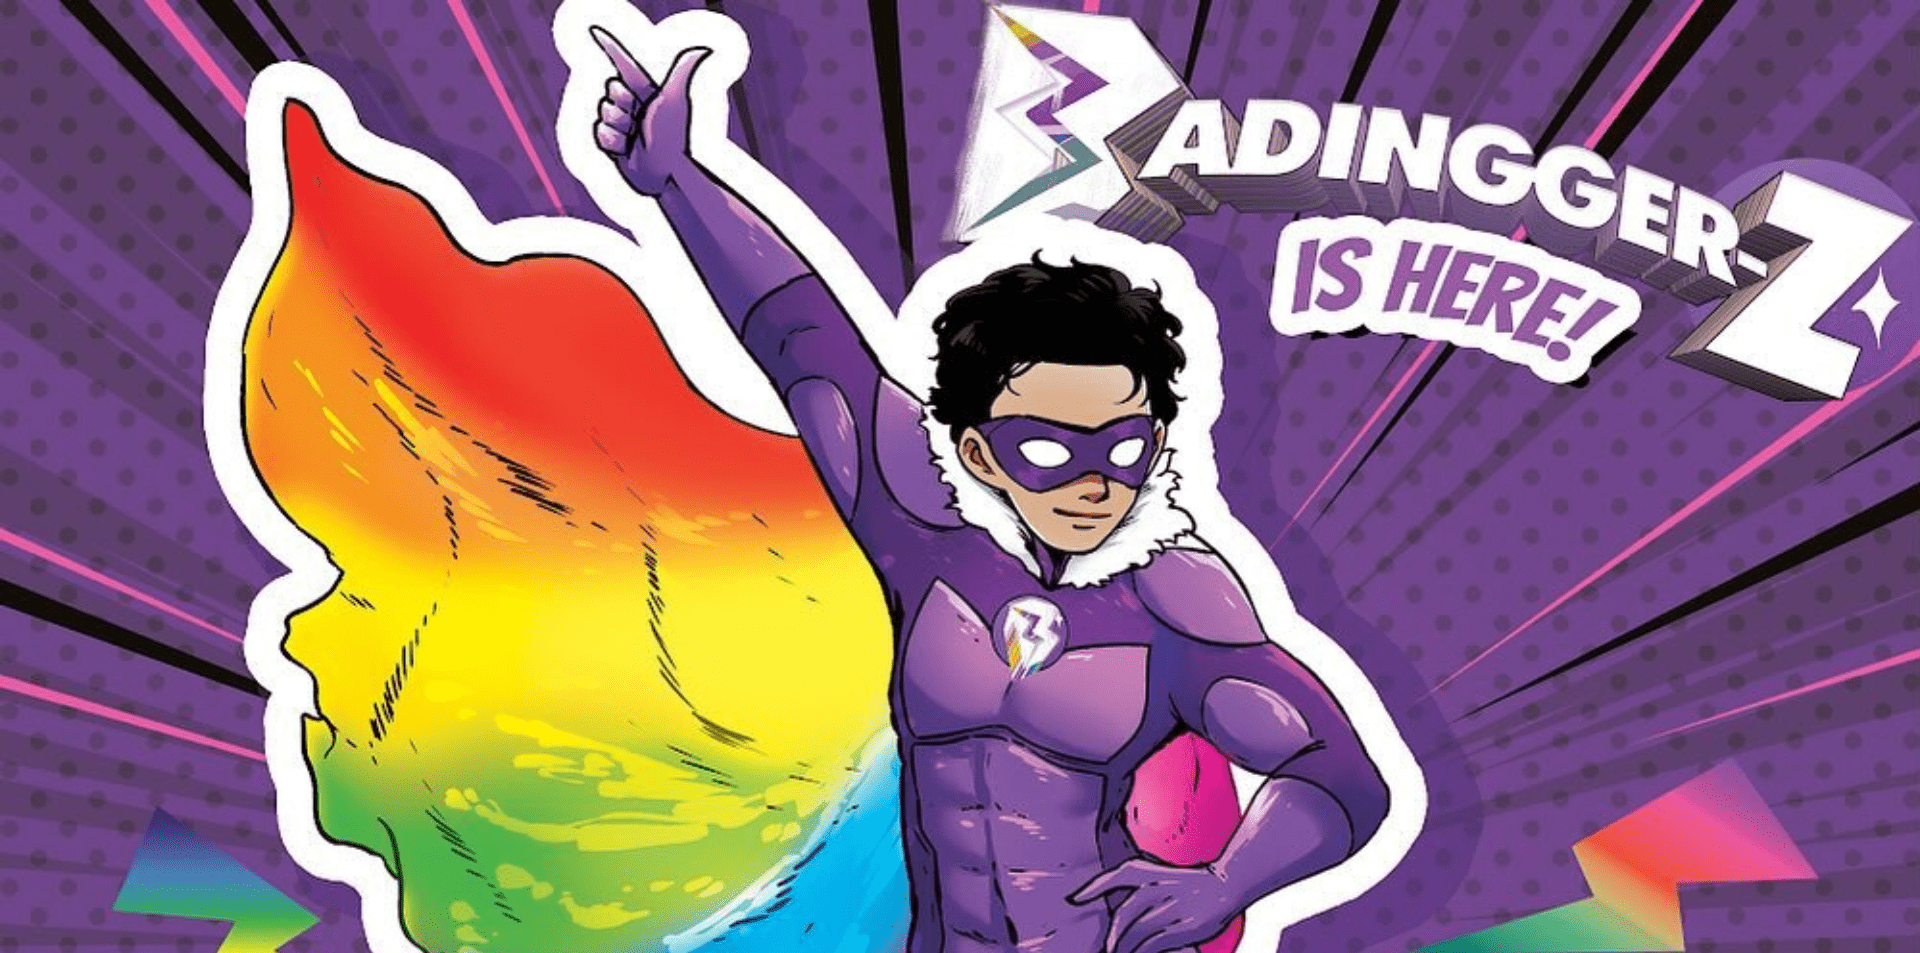 Badingger-Z, the Newest Kavogue Superhero, is Ready to Take Center Stage